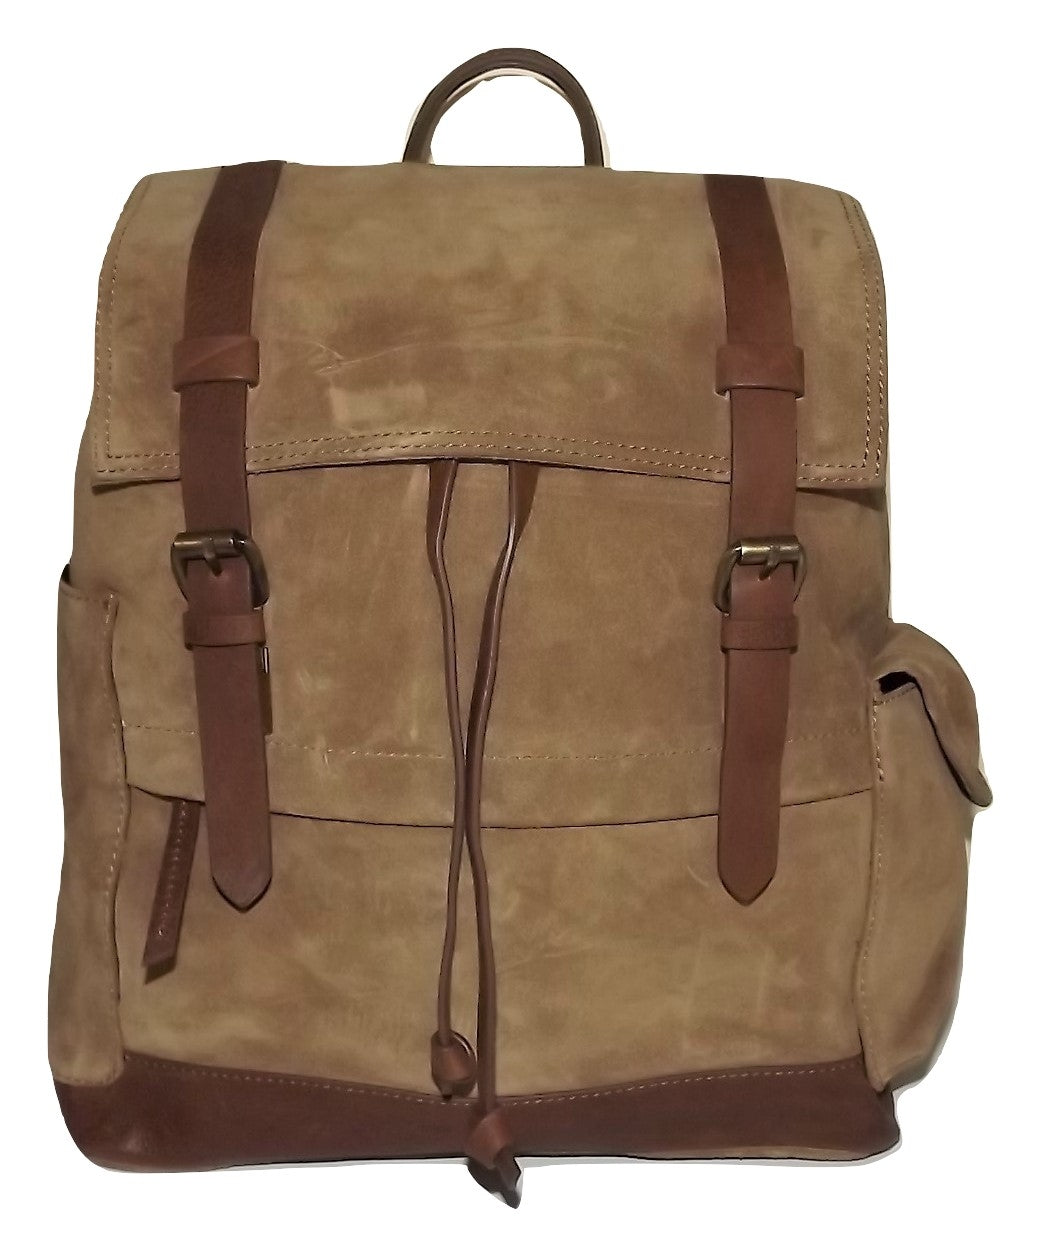 Scully Retro Nubuck Leather Cargo Drawstring Backpack Tan/Brown